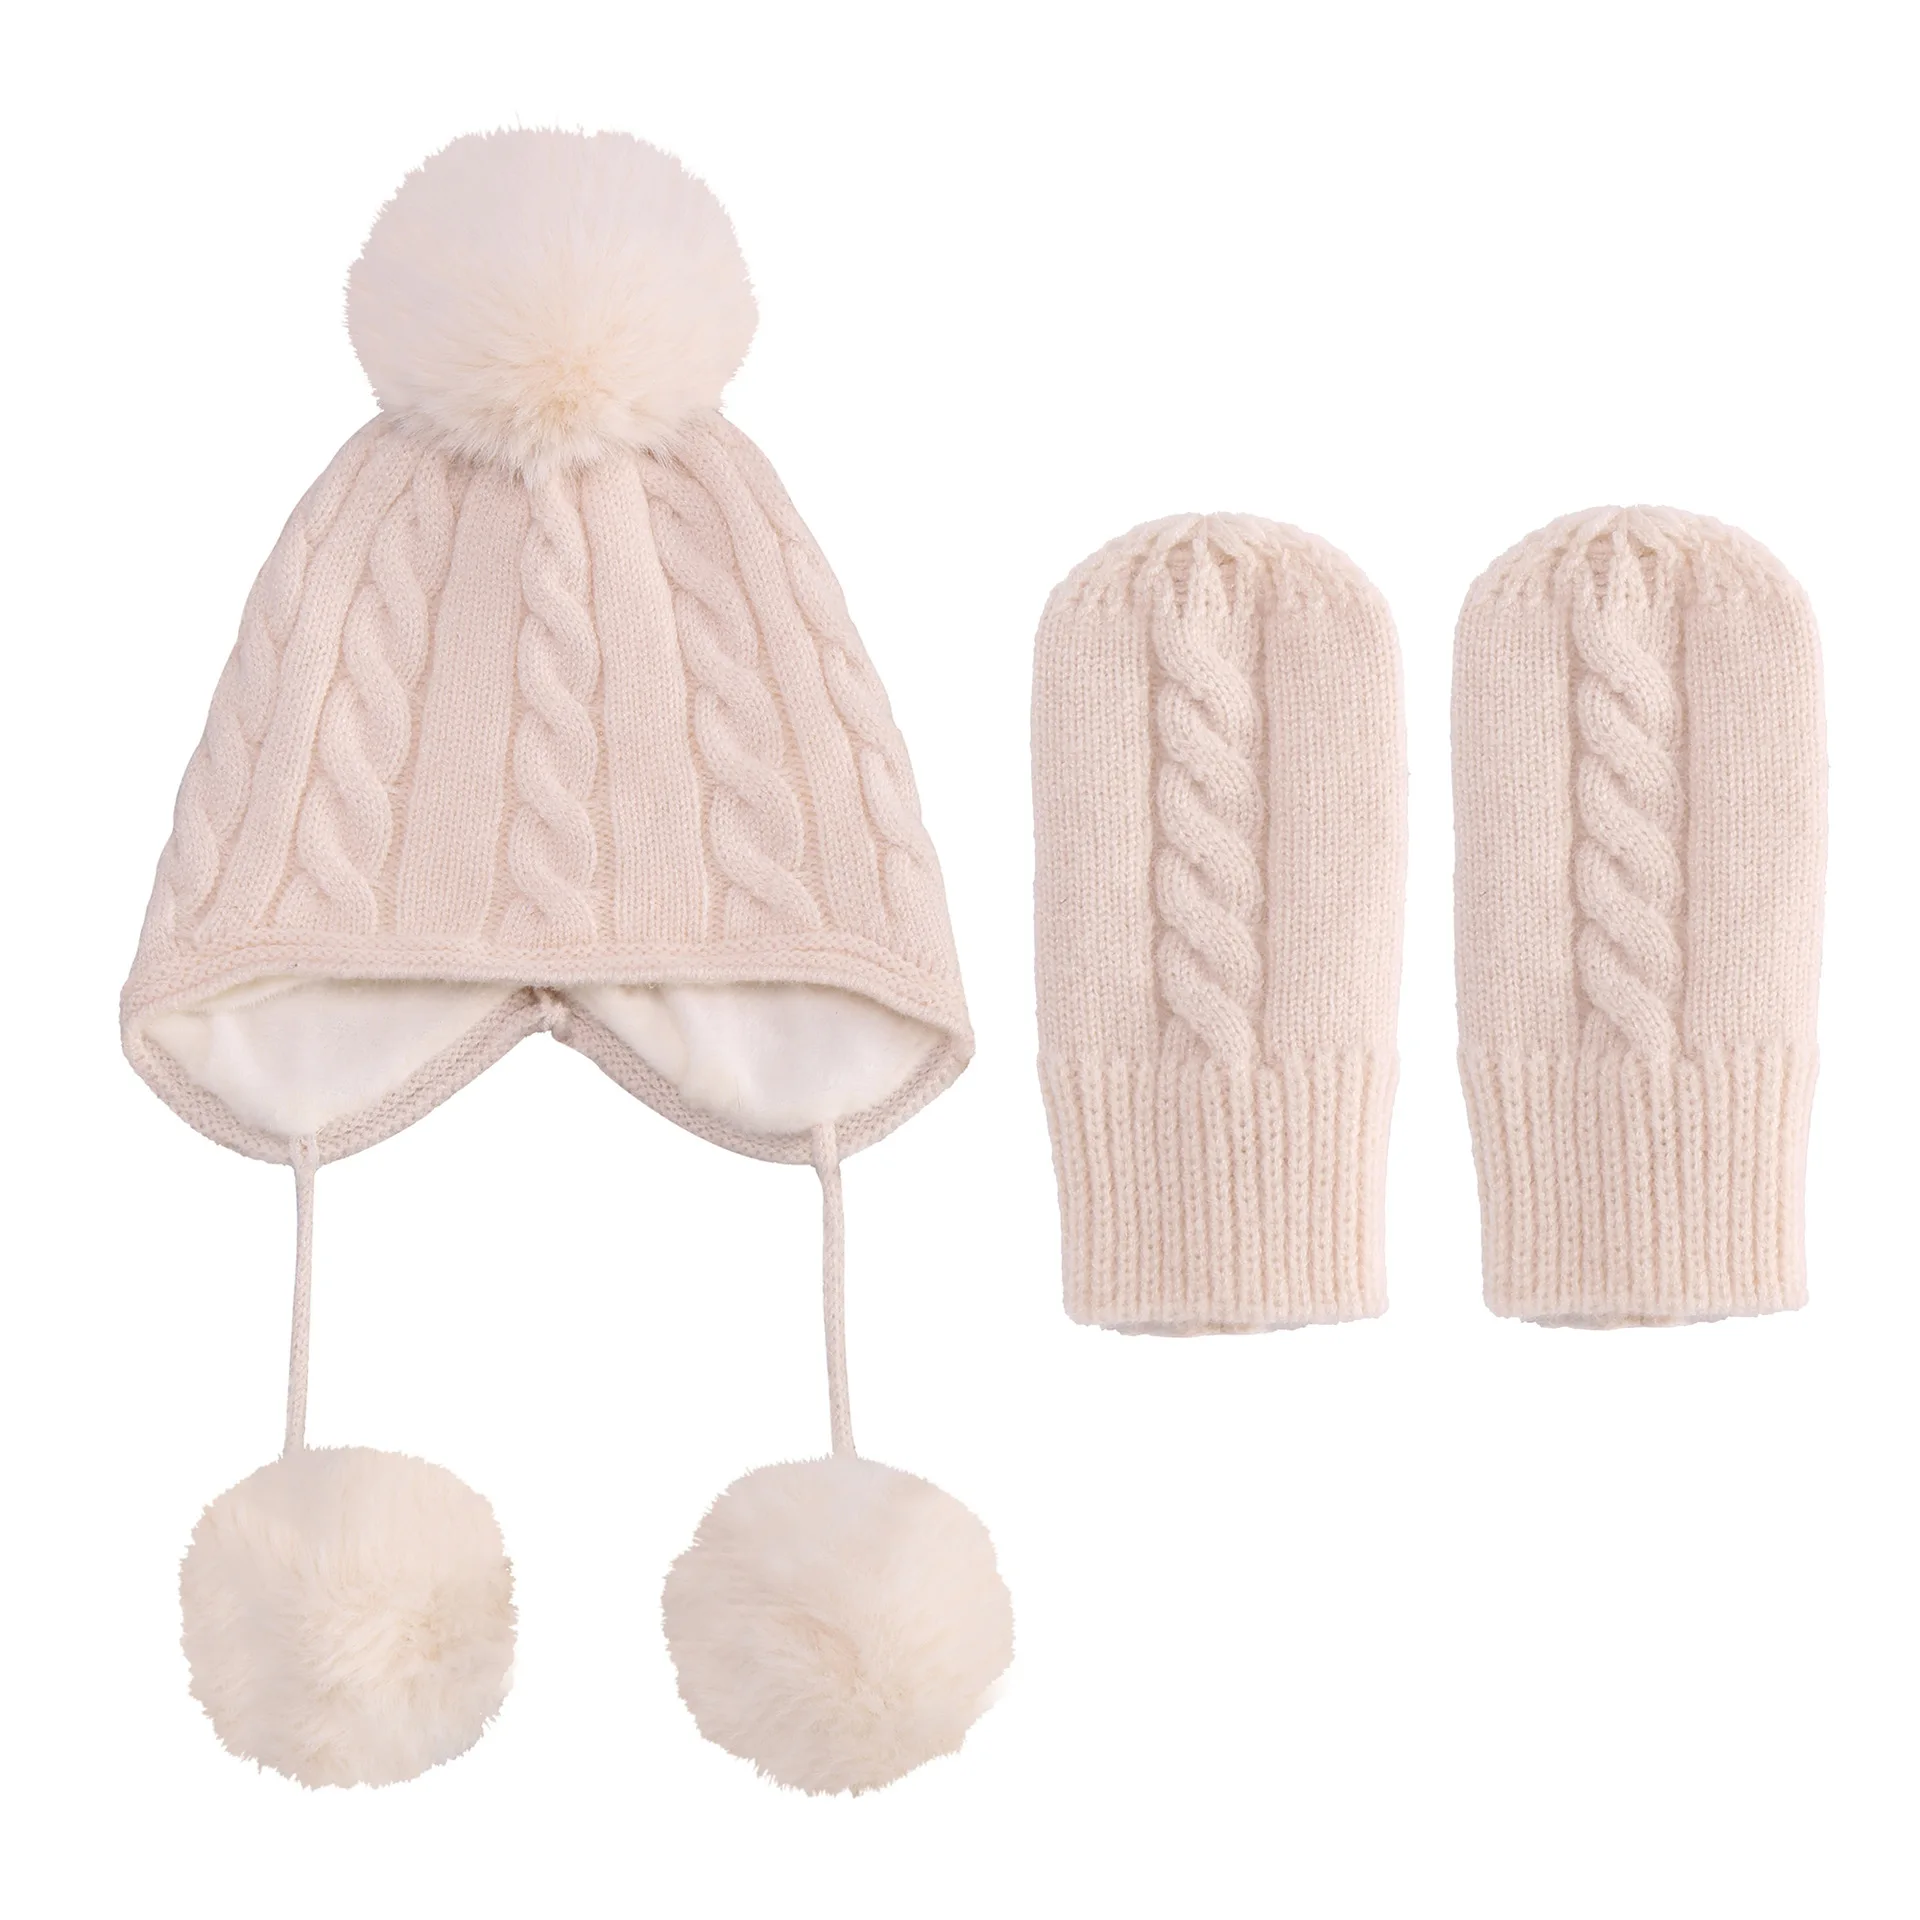 Cute Knitted Pompom Hat and Glove Sets For Kids Thick Warm Girl/Boy Hat Gloves Beanie Winter Ear Warm Kids Hat Baby Bonnet Muts enlarge